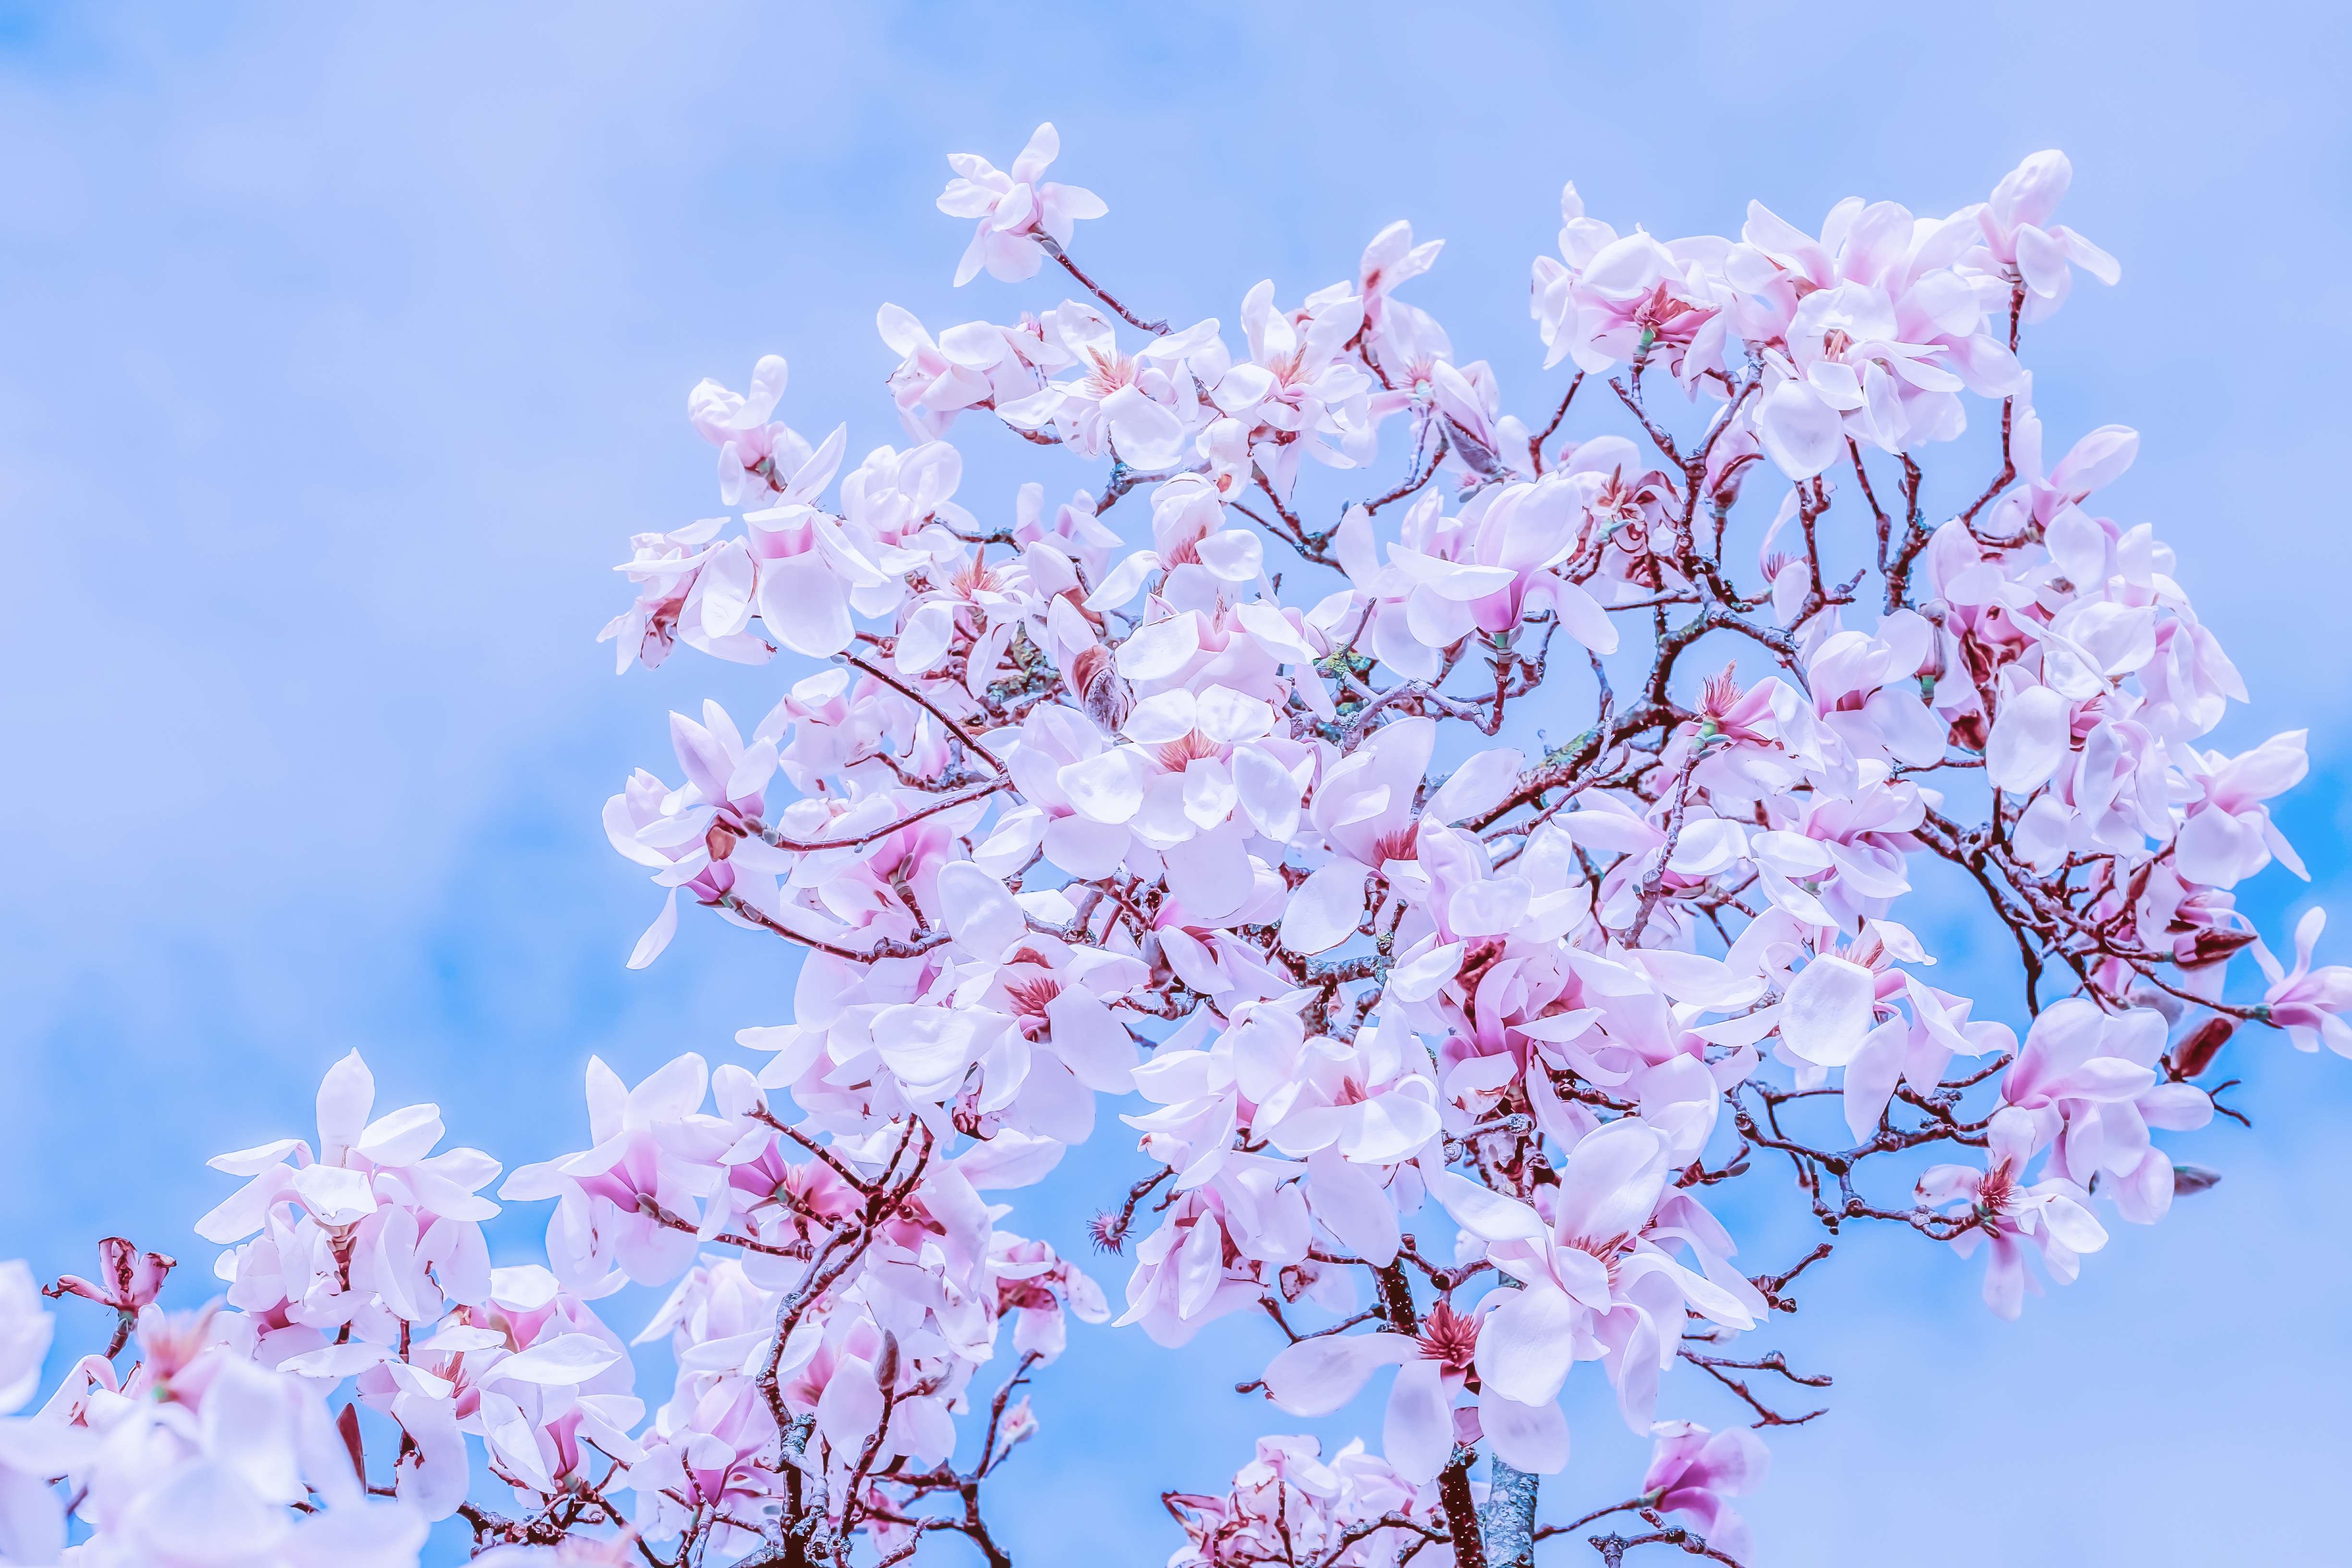 bloom, flowers, sky, branches, flowering, magnolia lock screen backgrounds